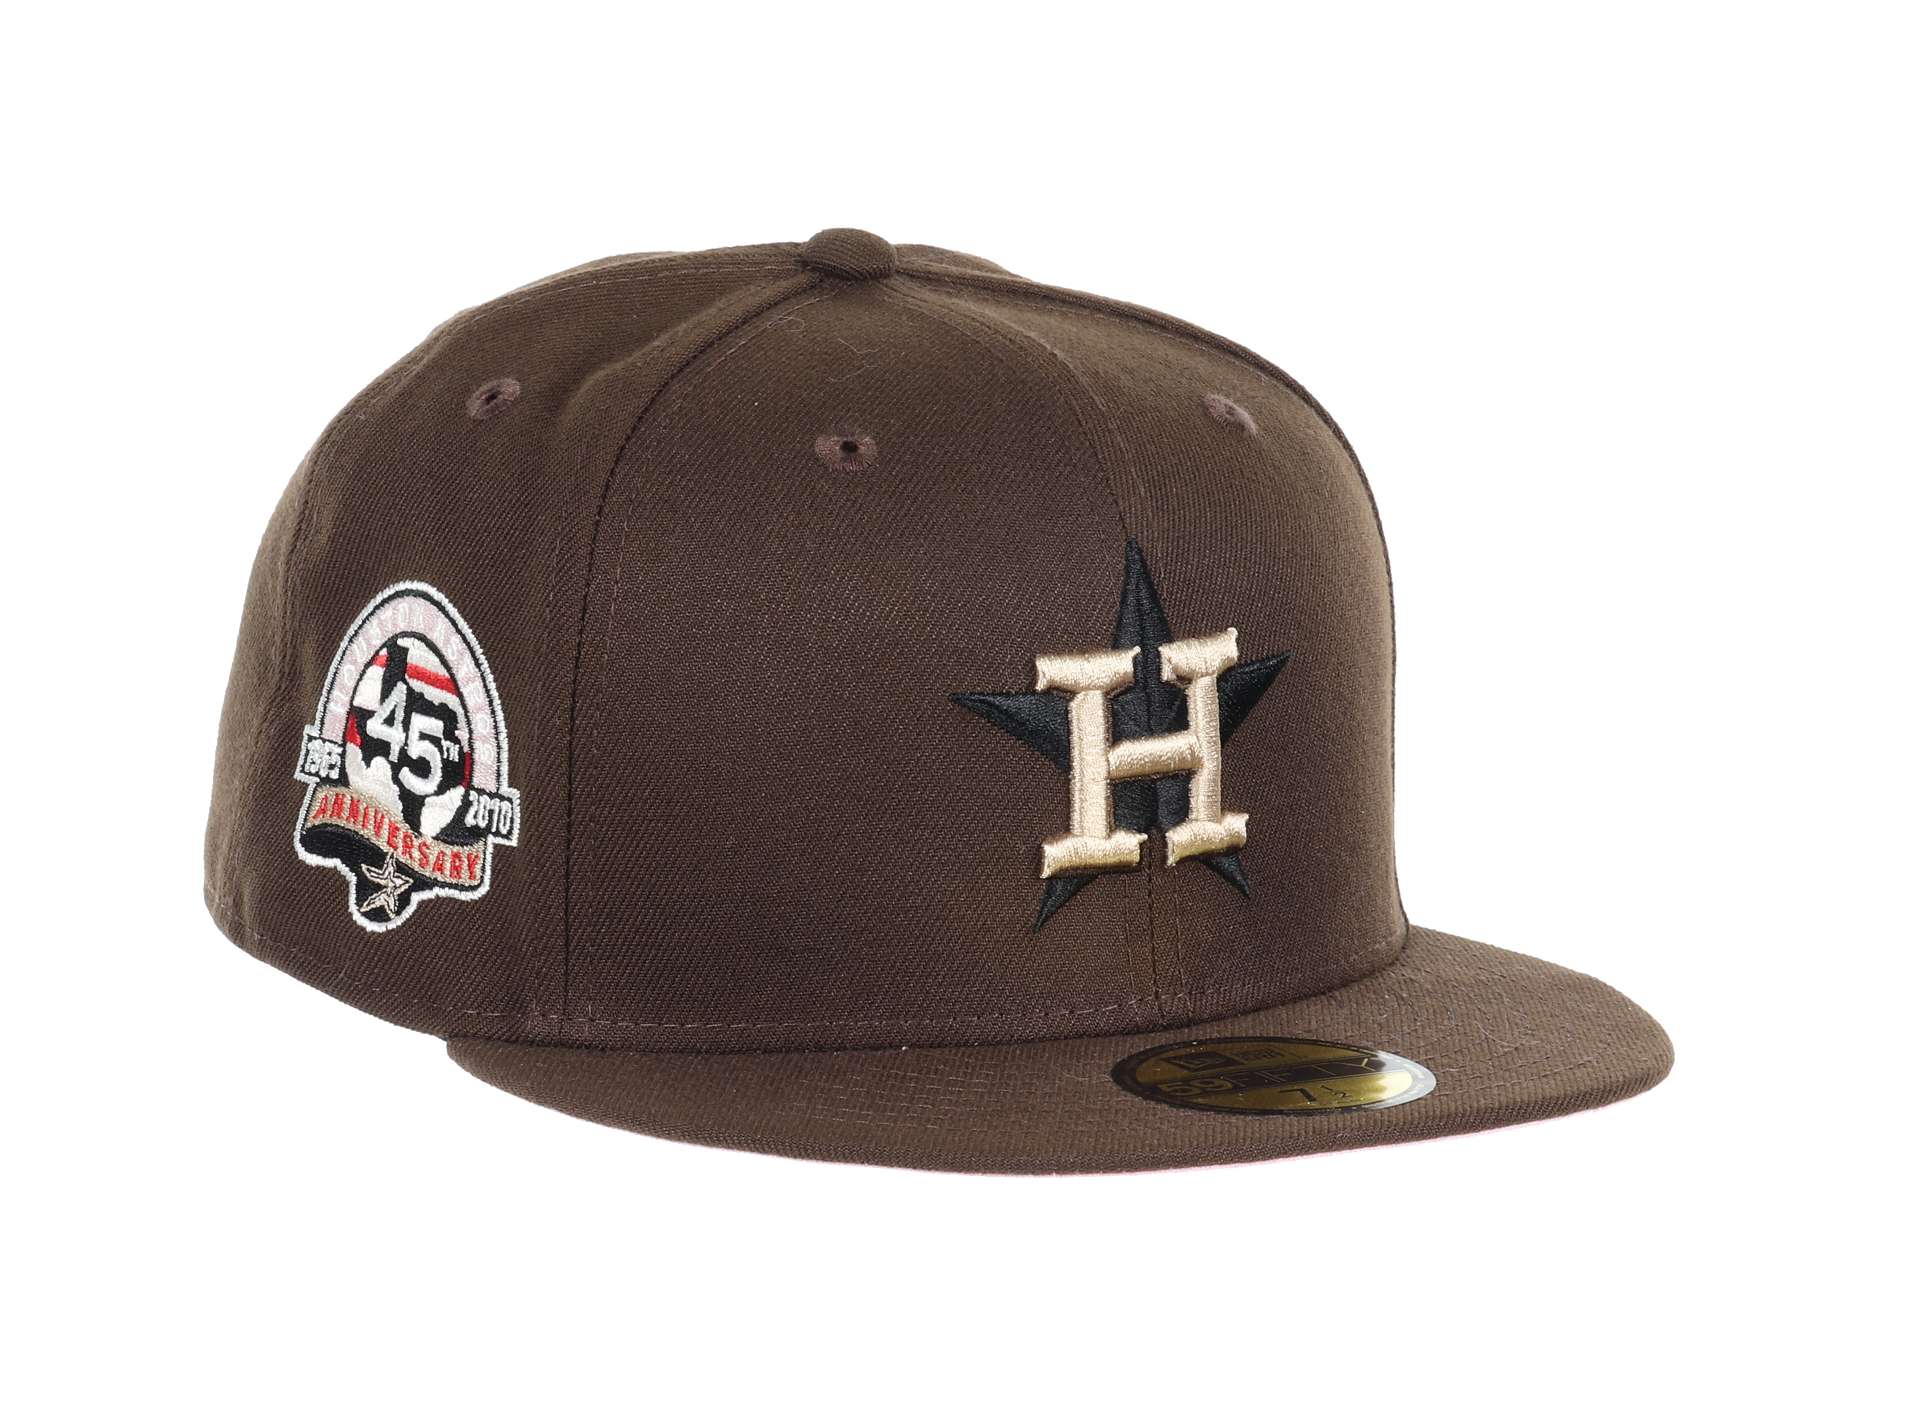 Houston Astros MLB Cooperstown 45th Anniversary Sidepatch Brown 59Fifty Basecap New Era